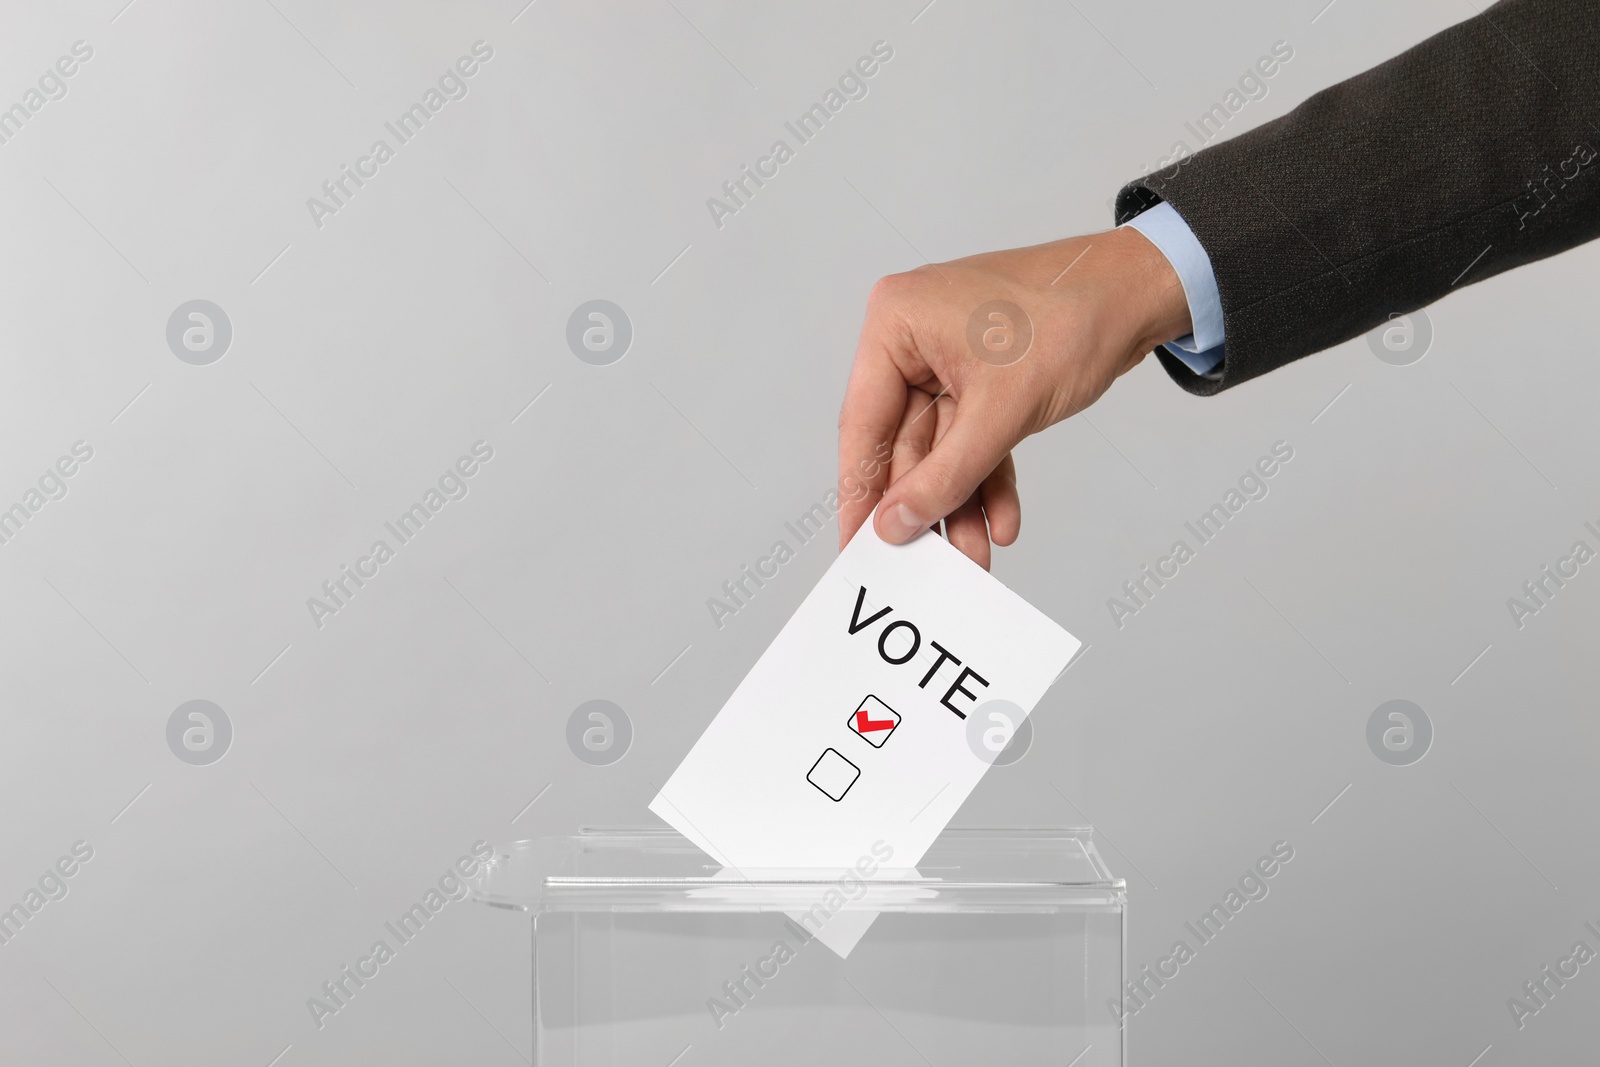 Image of Man putting paper with word Vote and tick into ballot box on light grey background